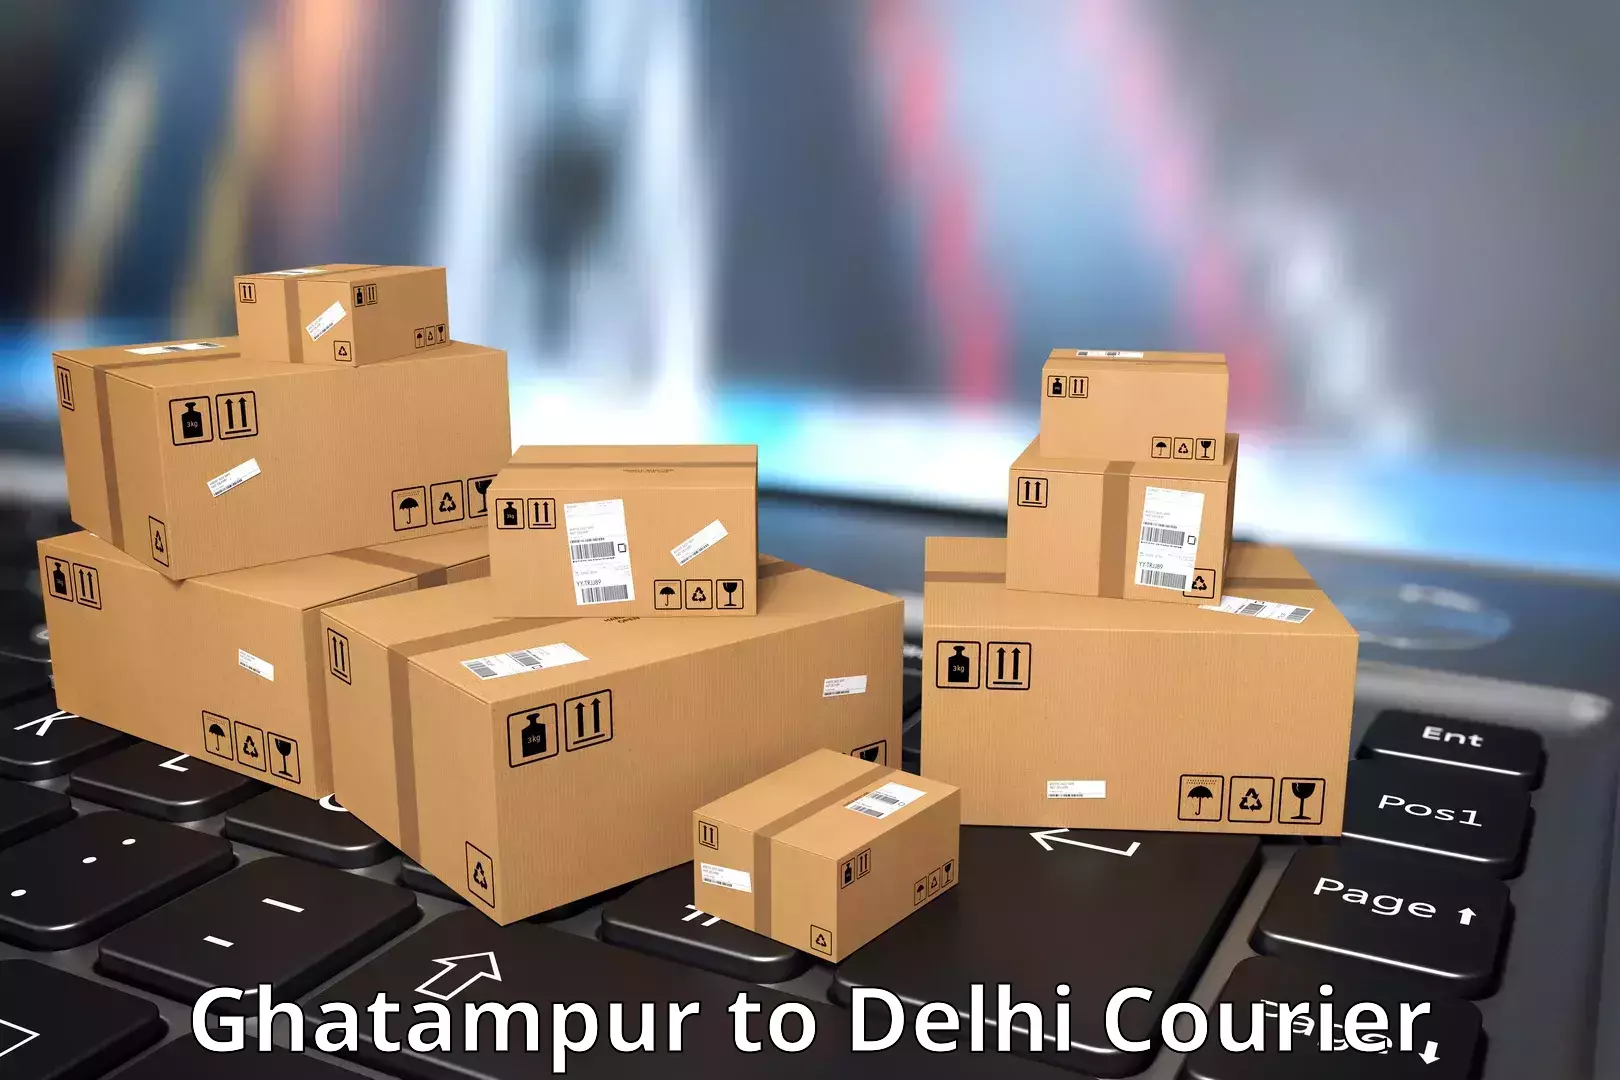 On-demand courier Ghatampur to Lodhi Road